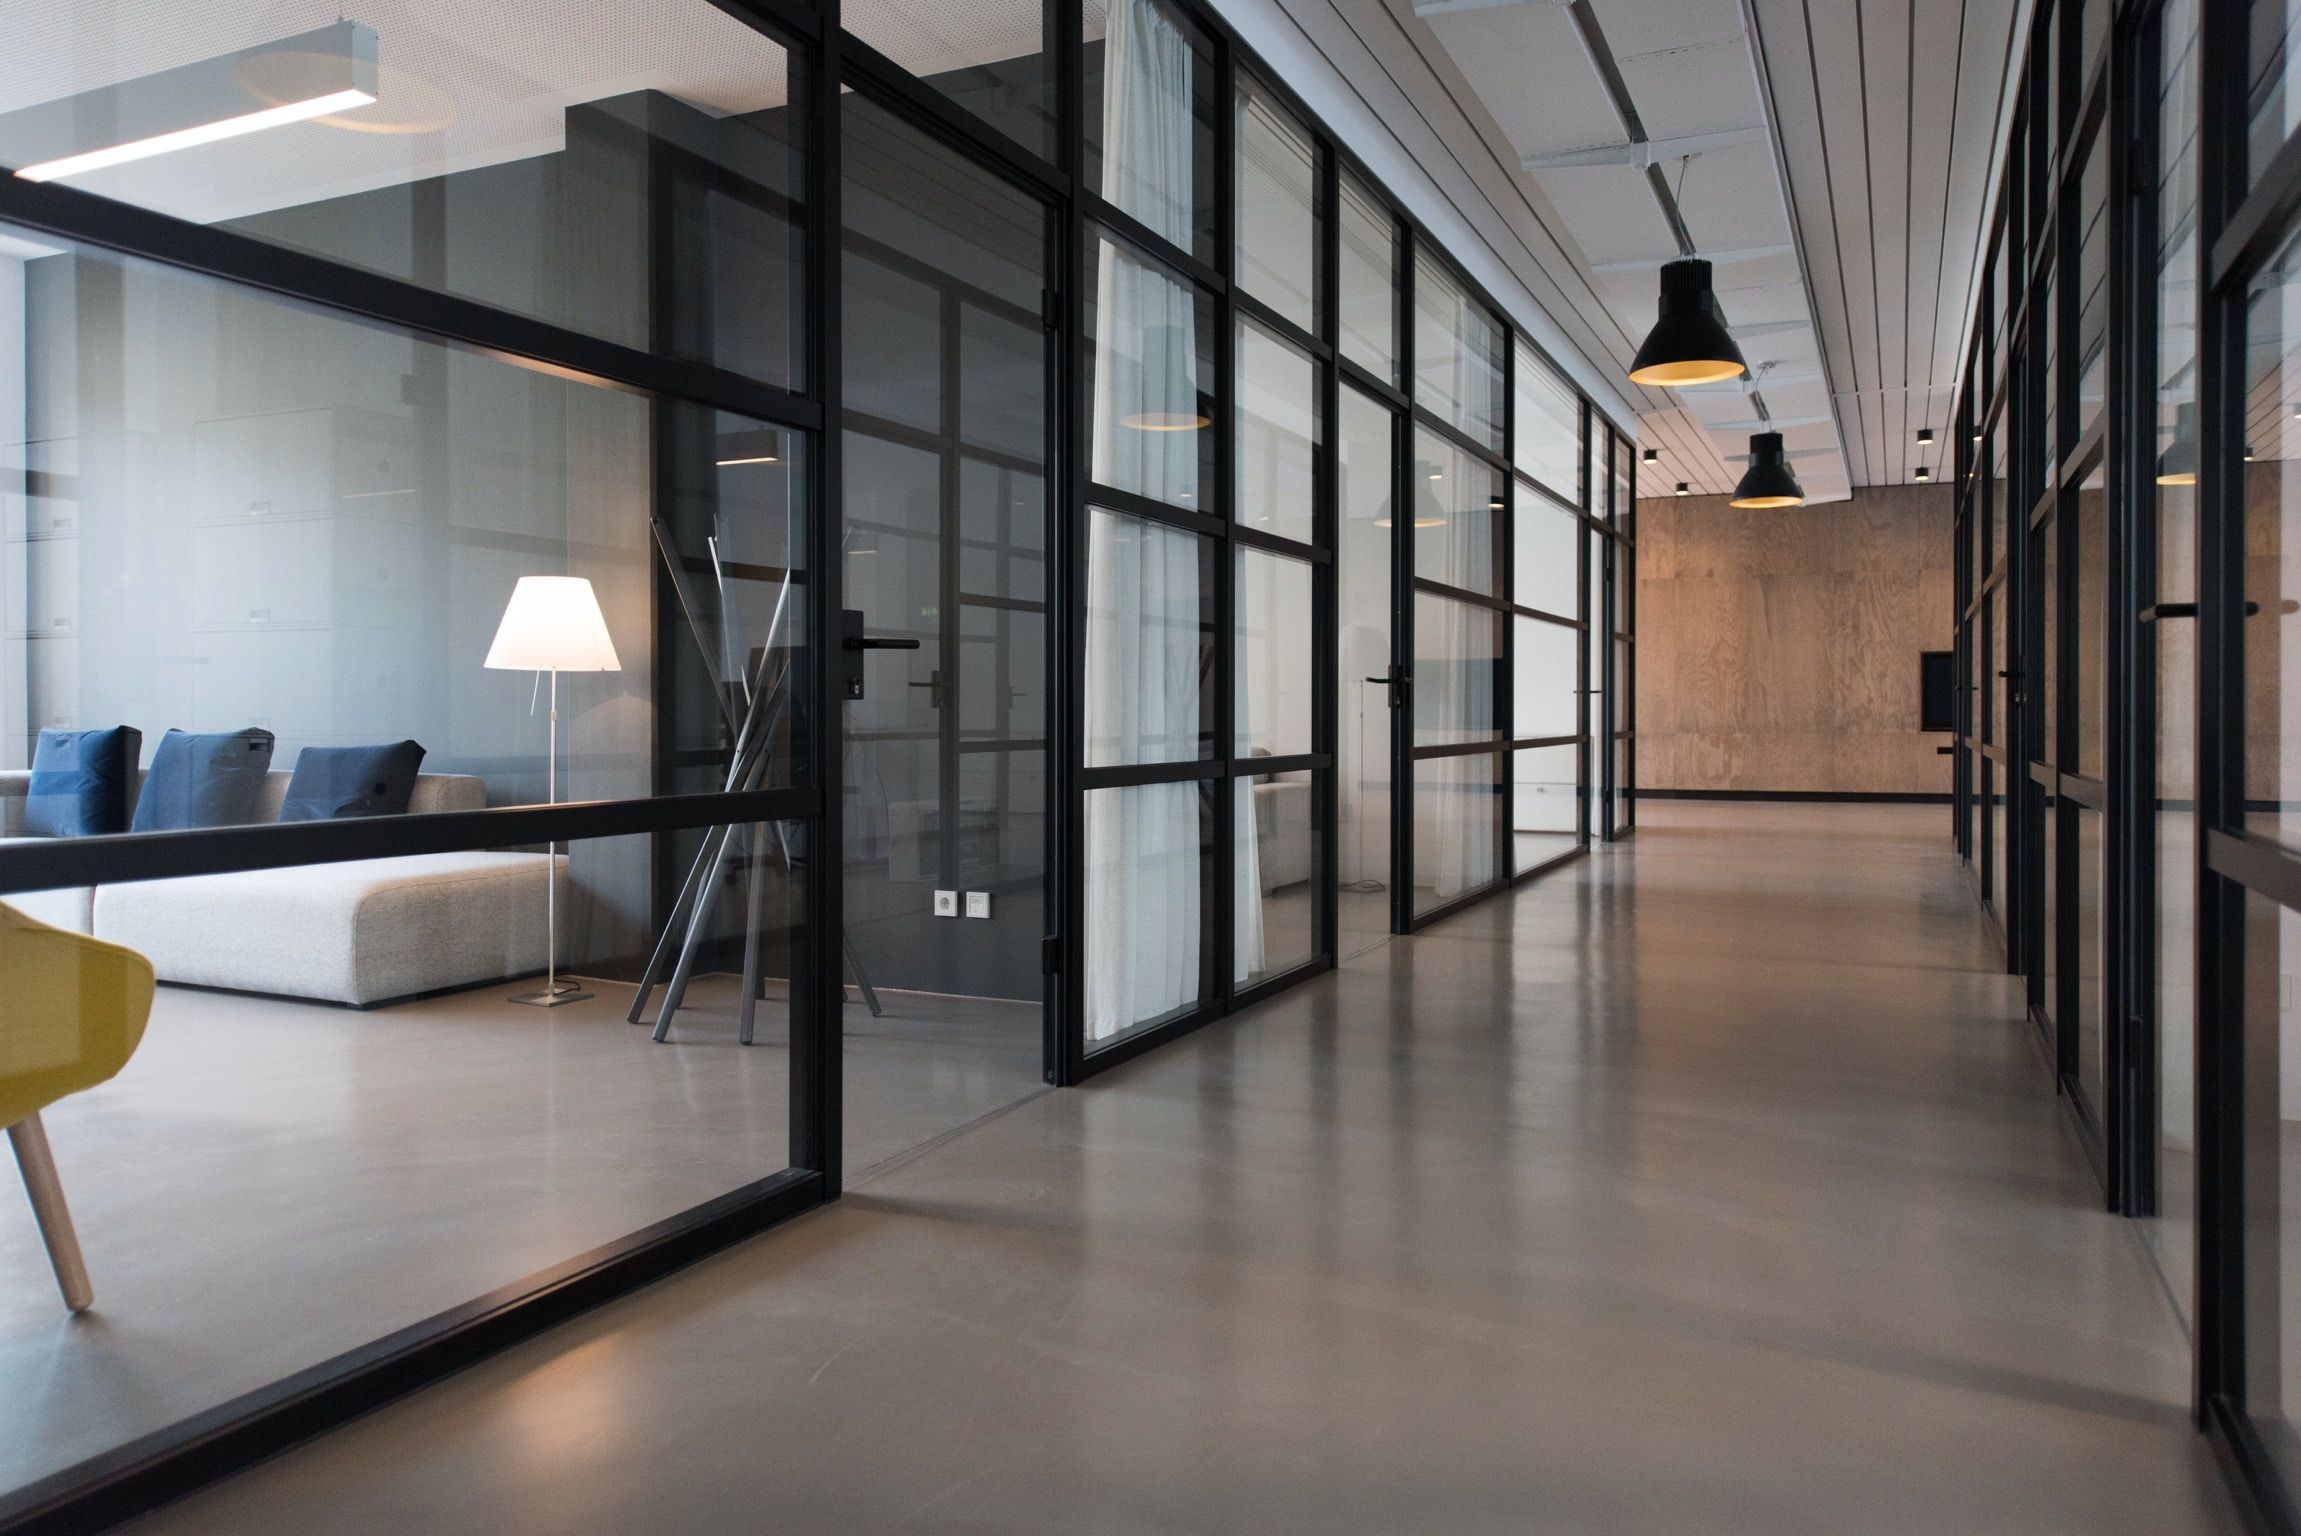 A picture of a hallway in a shared office space building. You can see office furniture behind glass walls.